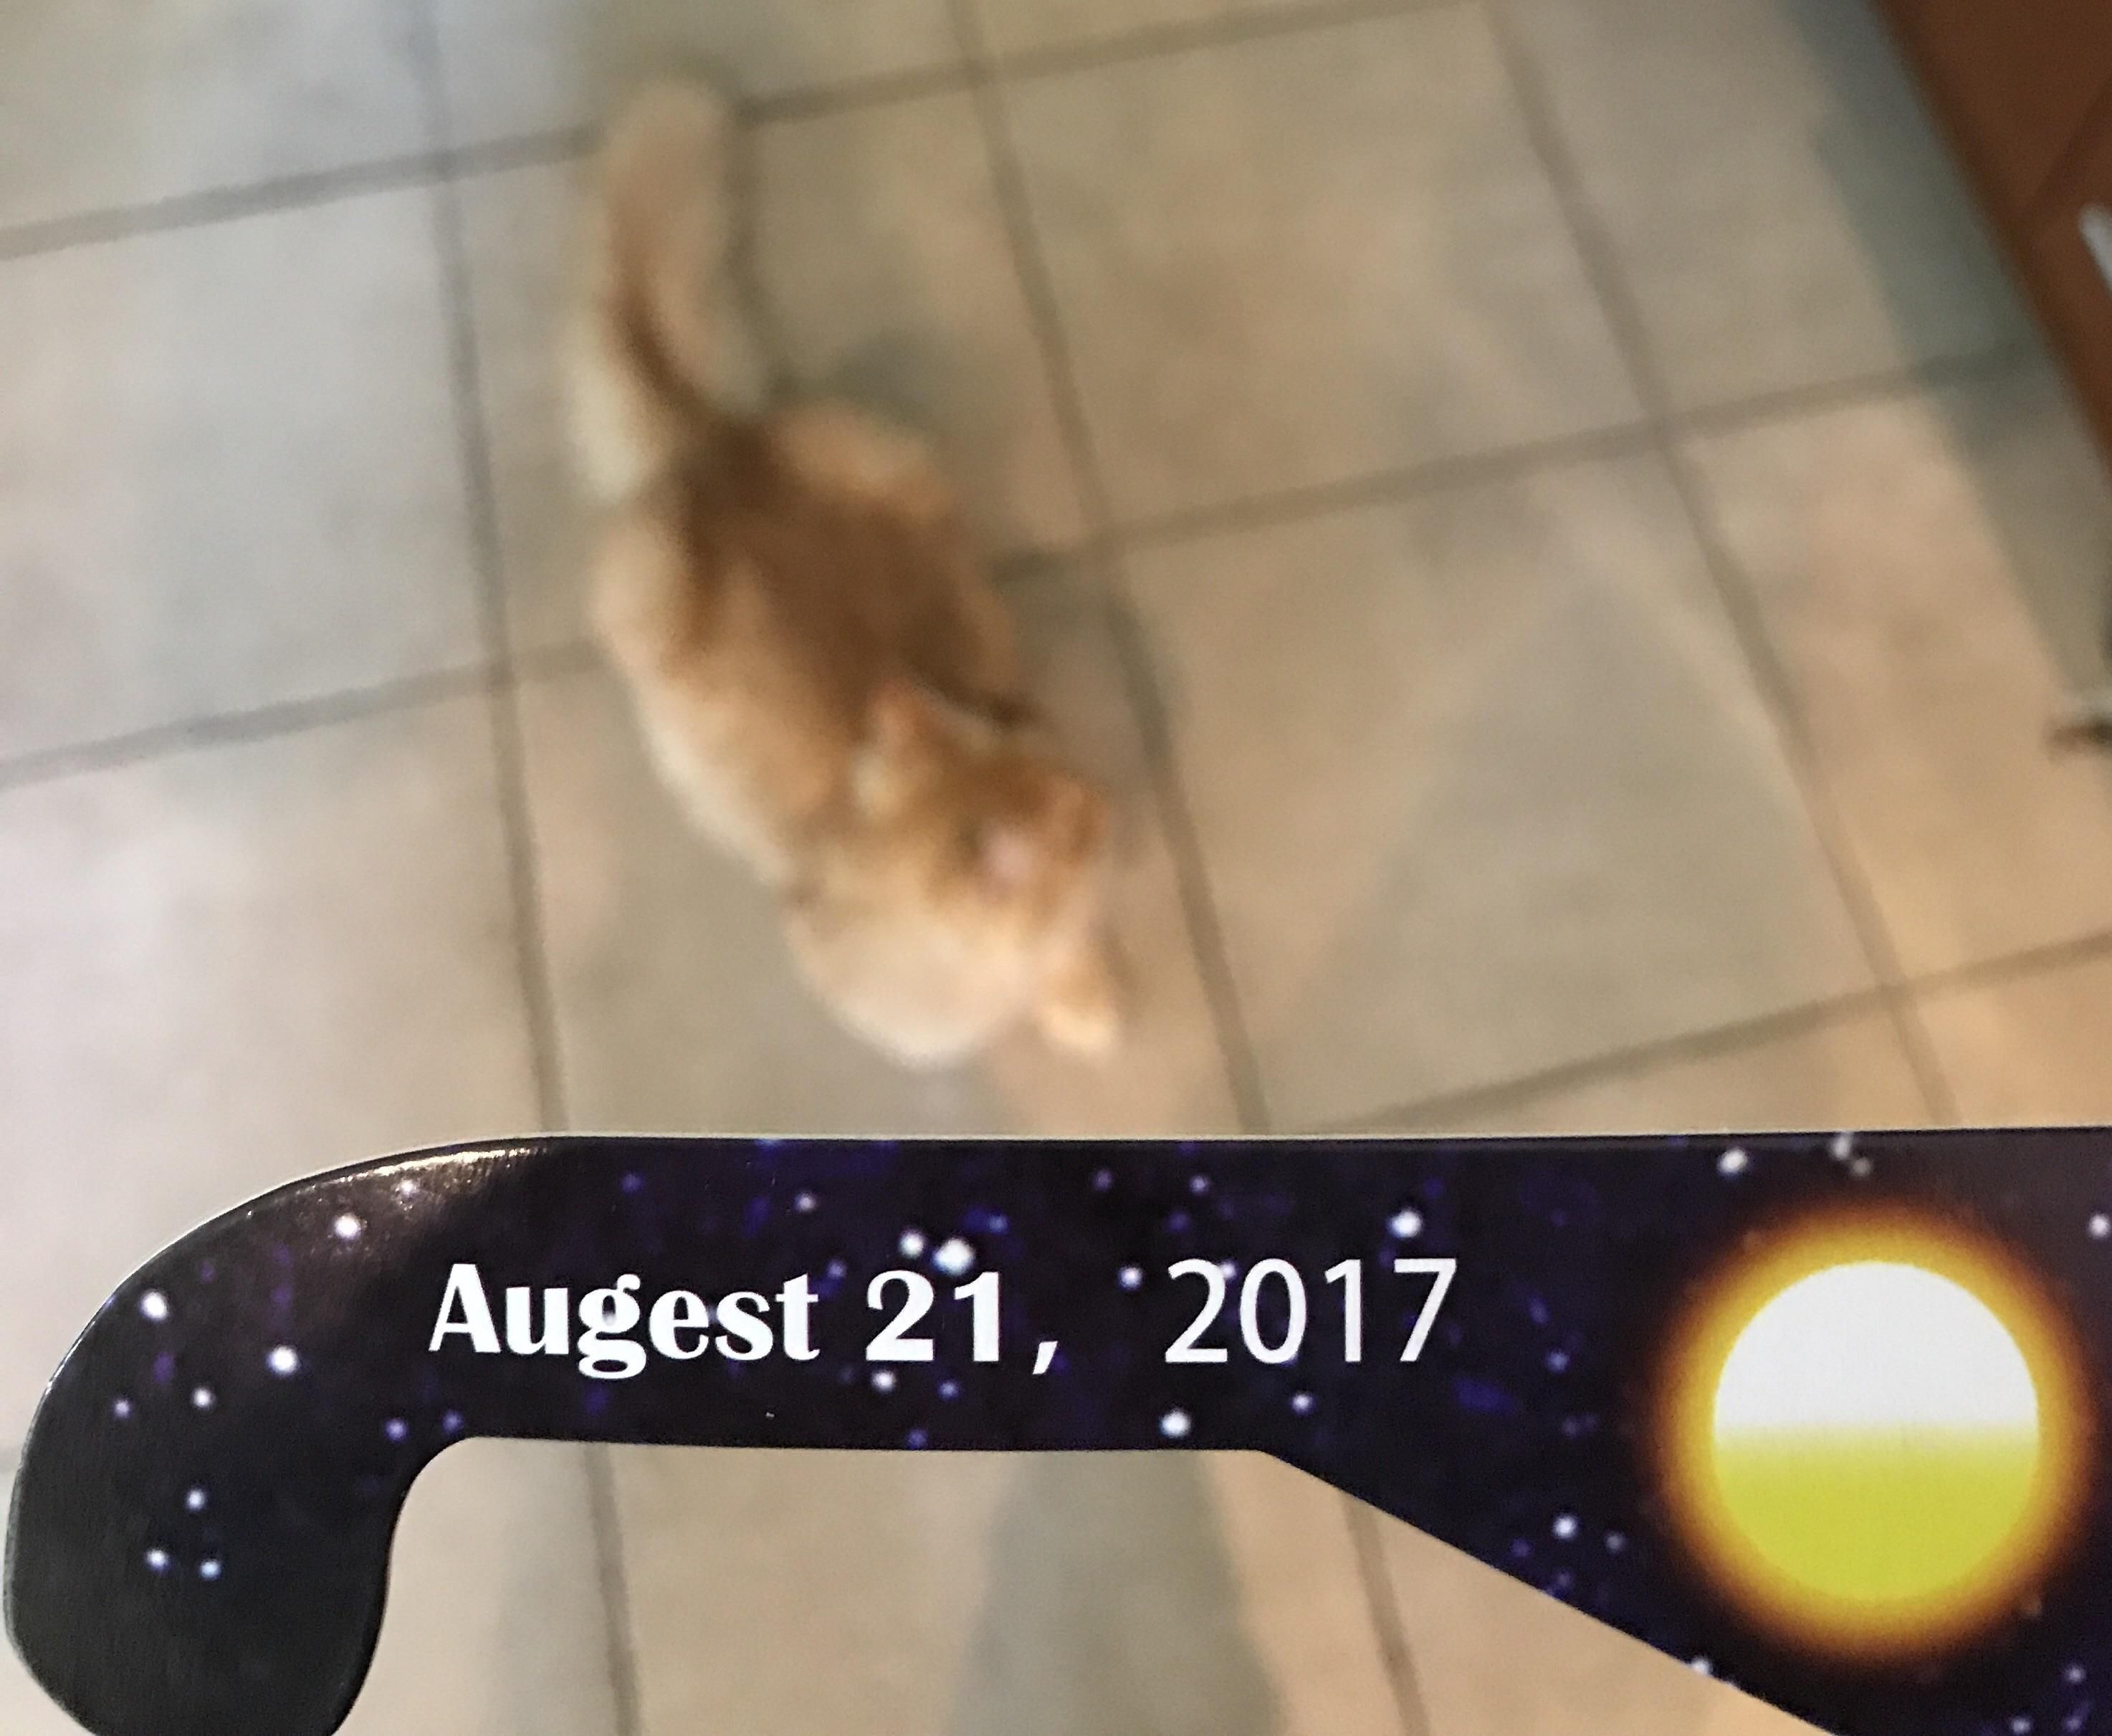 Feeling really confident about my eclipse glasses